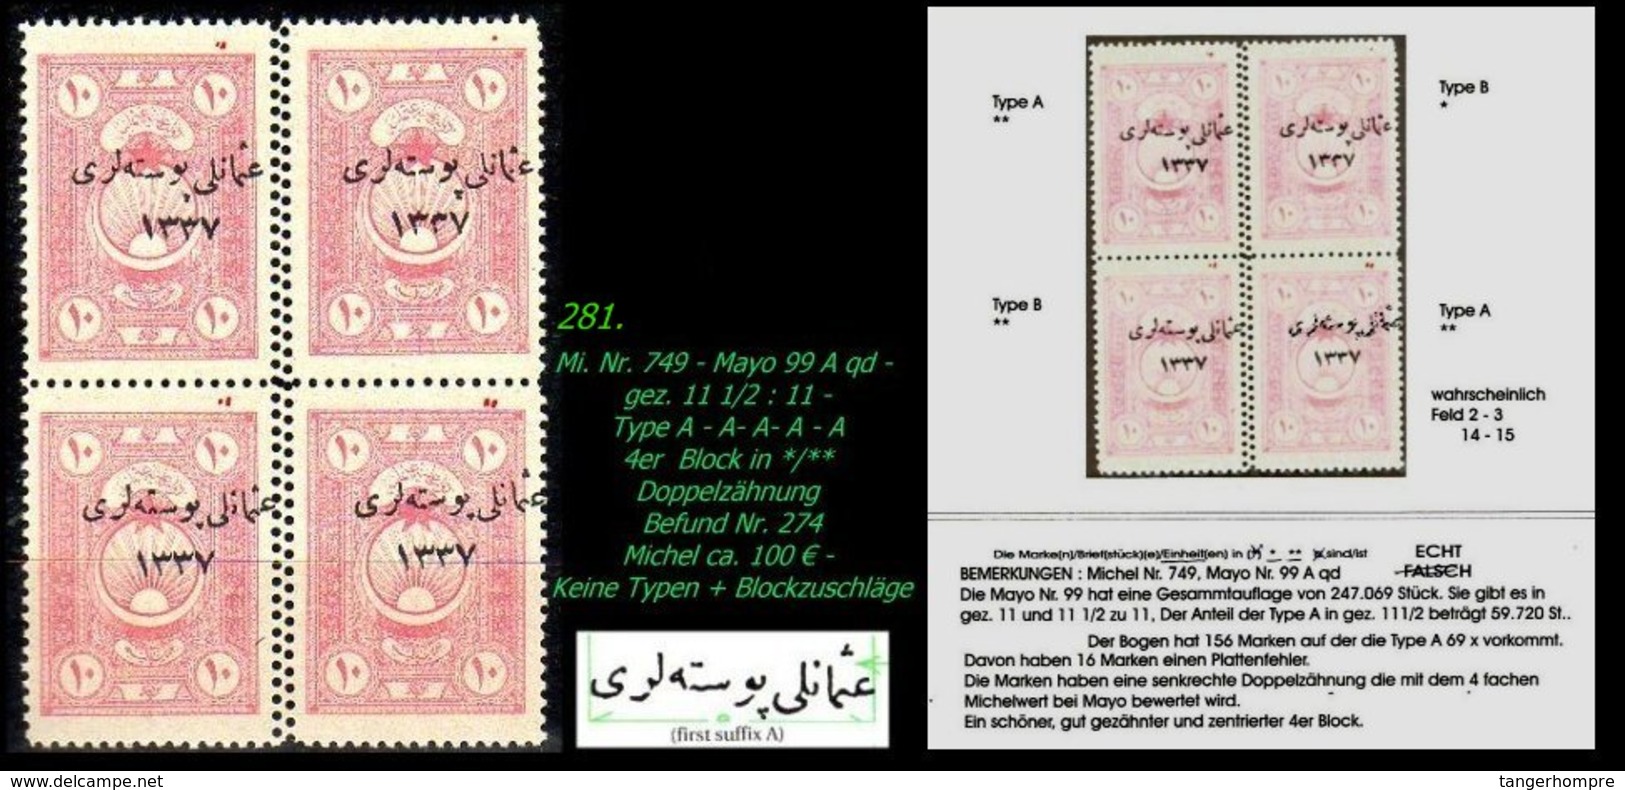 EARLY OTTOMAN SPECIALIZED FOR SPECIALIST, SEE...Mi. Nr. 749 - Mayo 99 Aqd- Doppeltgezähnt Im 4er Block -RR- - 1920-21 Anatolia